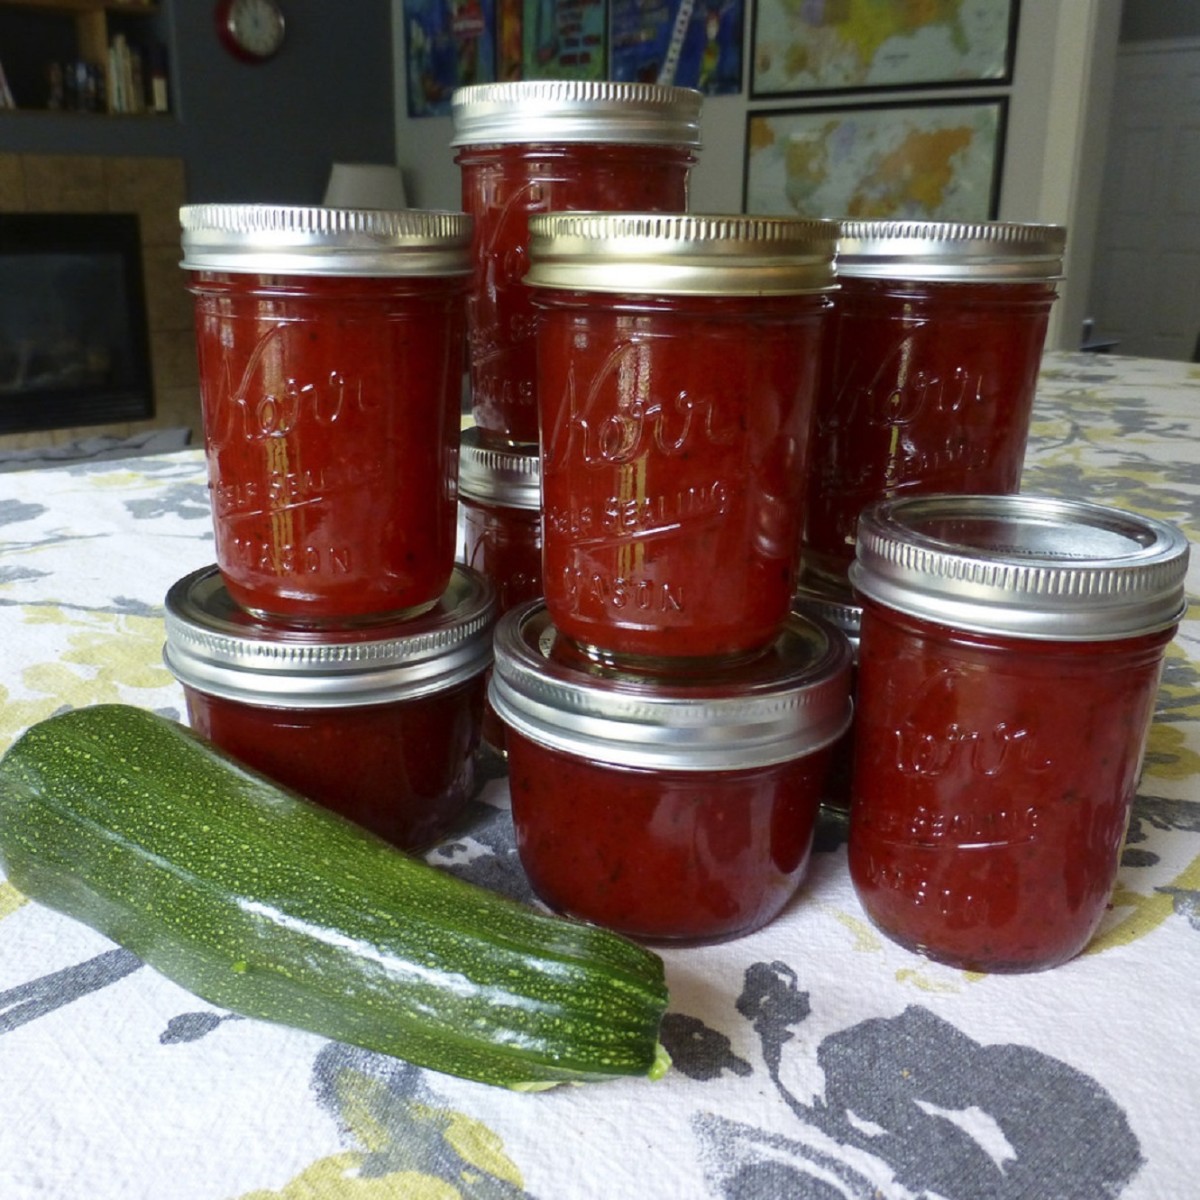 Get your veggies in by sneaking some zucchini into jam!